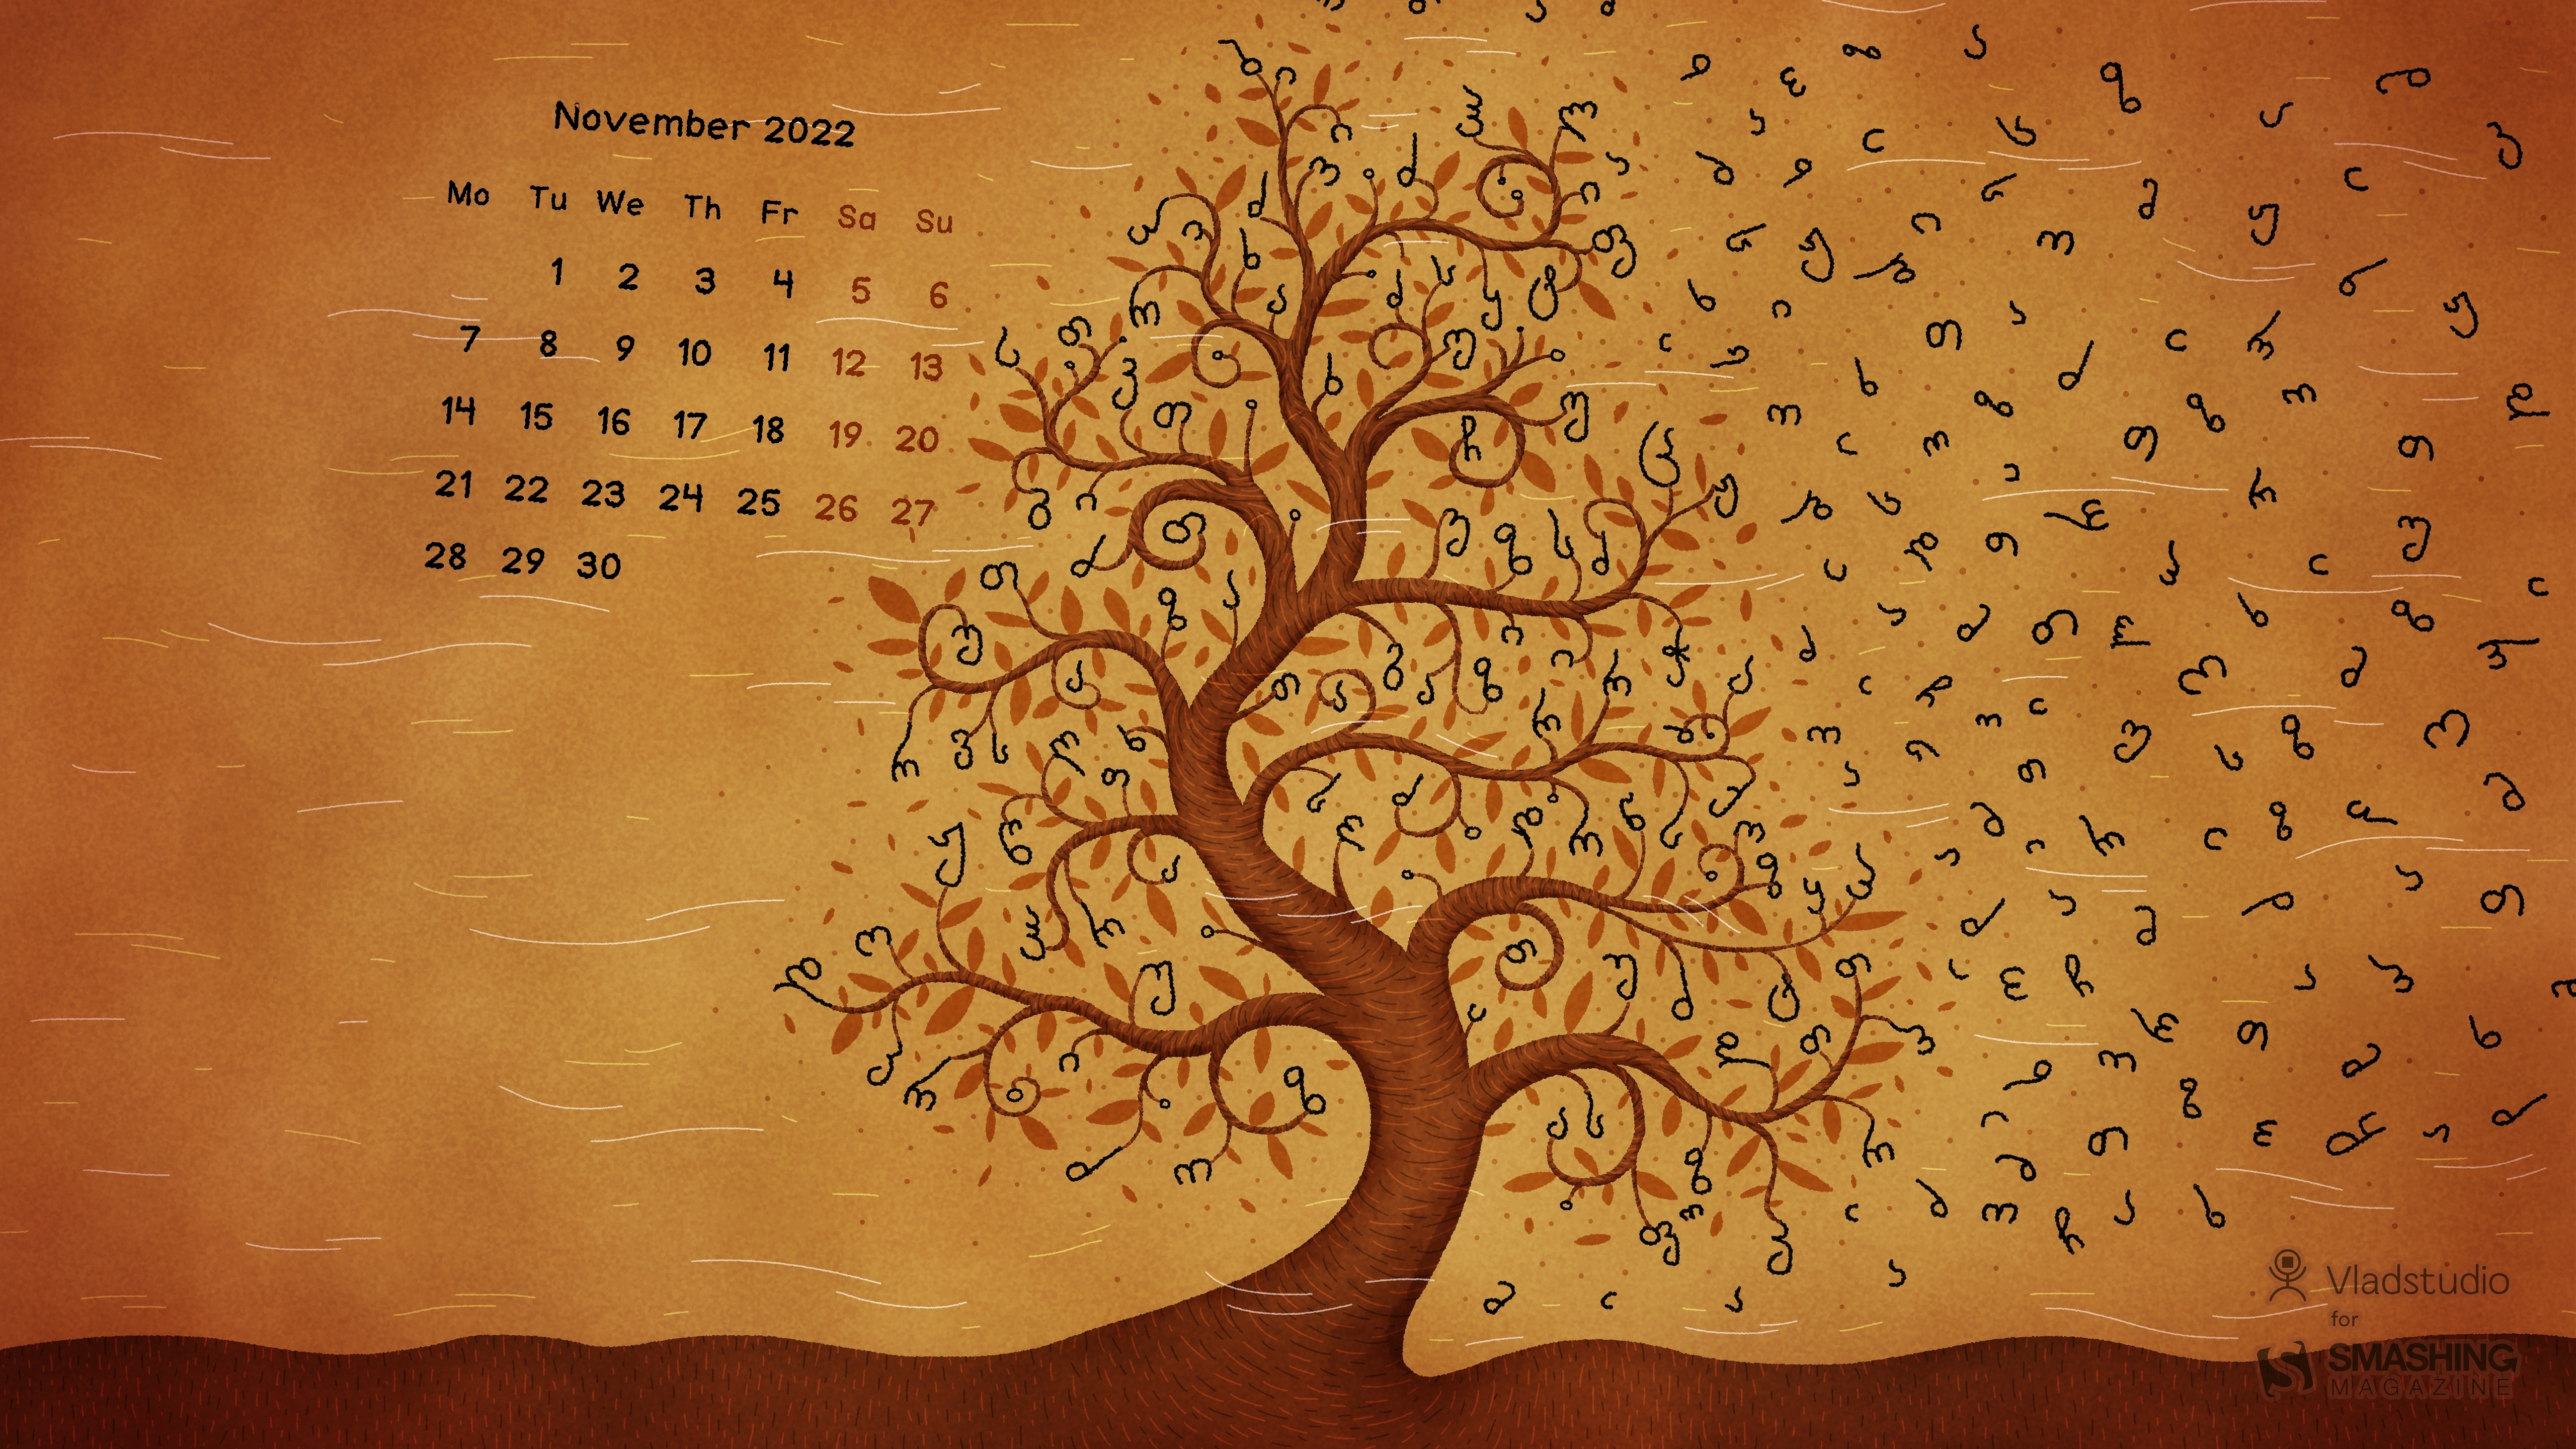 Download free vector of Mountain November monthly calendar iPhone wallpaper  vector by Hein about no  Iphone wallpaper vector Calendar wallpaper  Iphone wallpaper